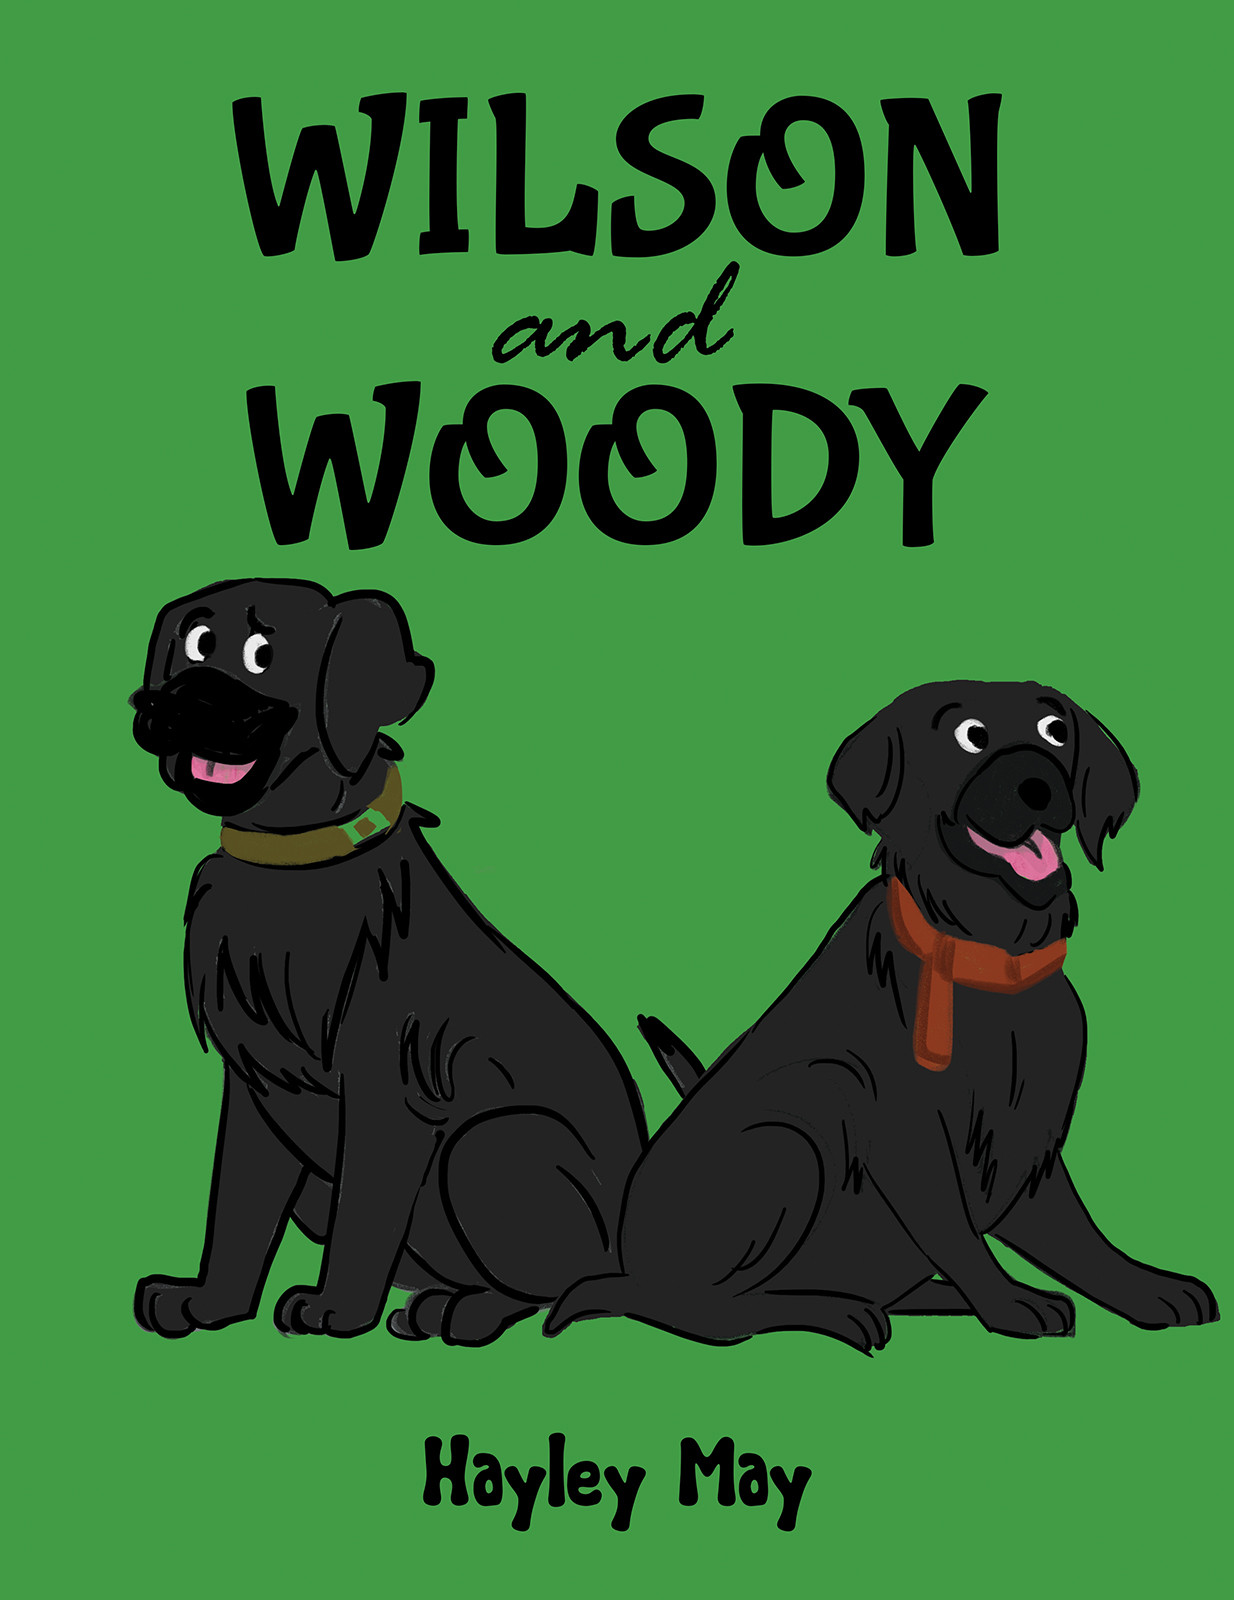 Wilson and Woody